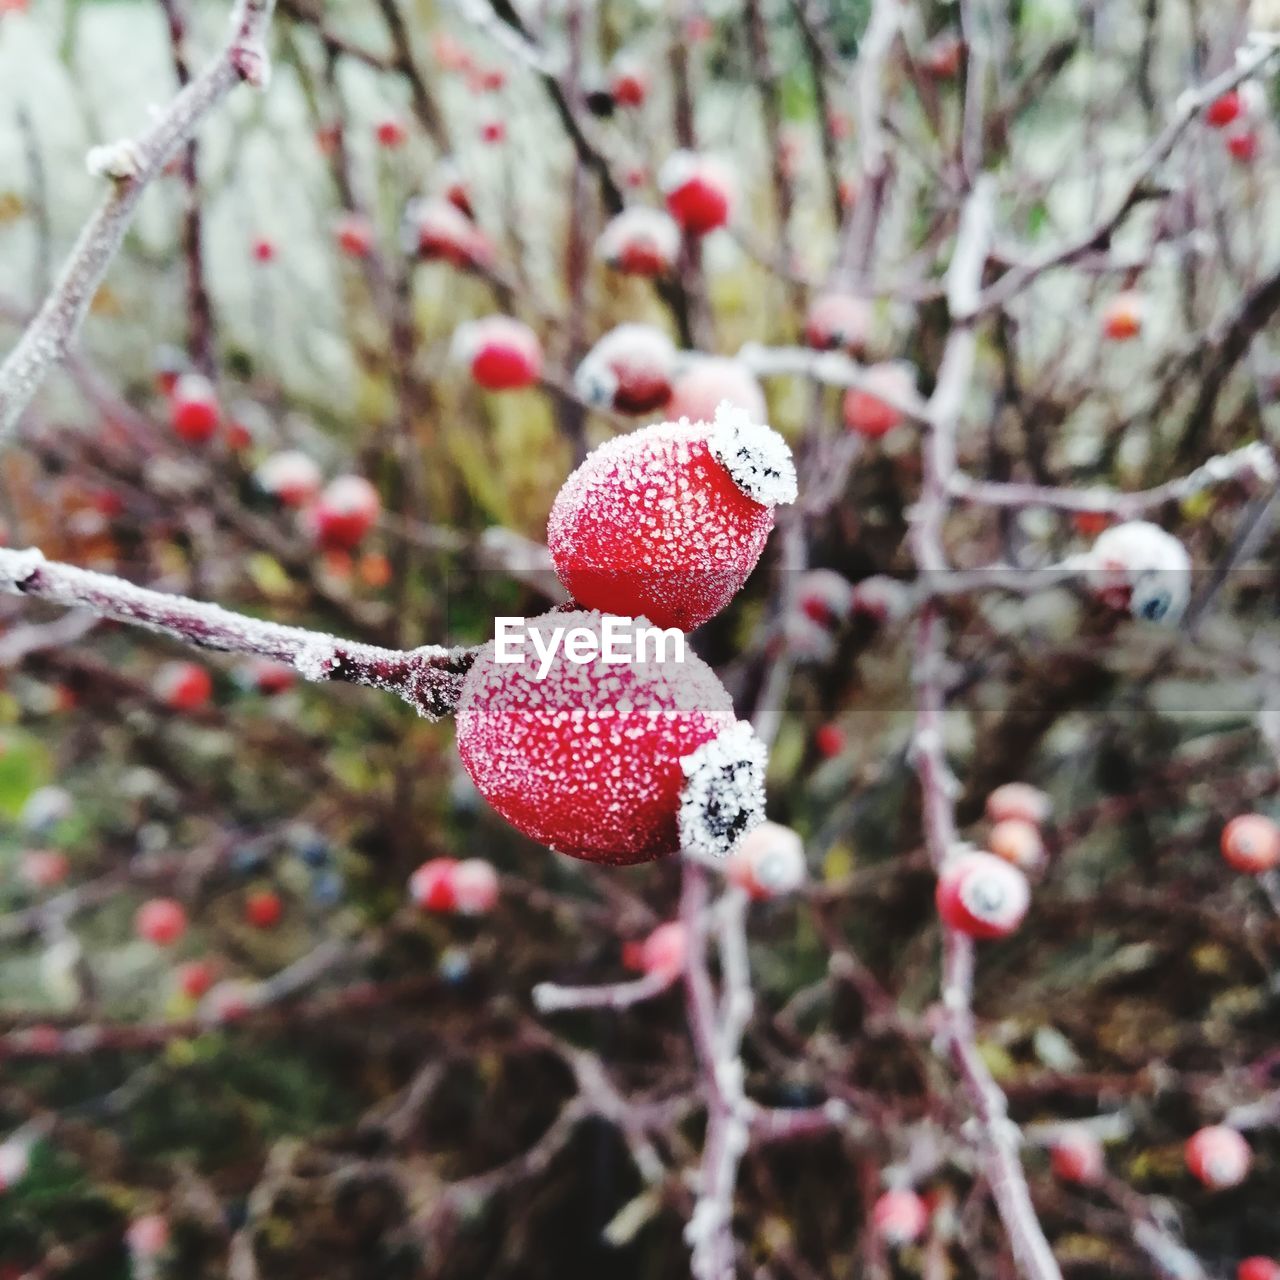 CLOSE-UP OF FROZEN FRUIT ON TREE